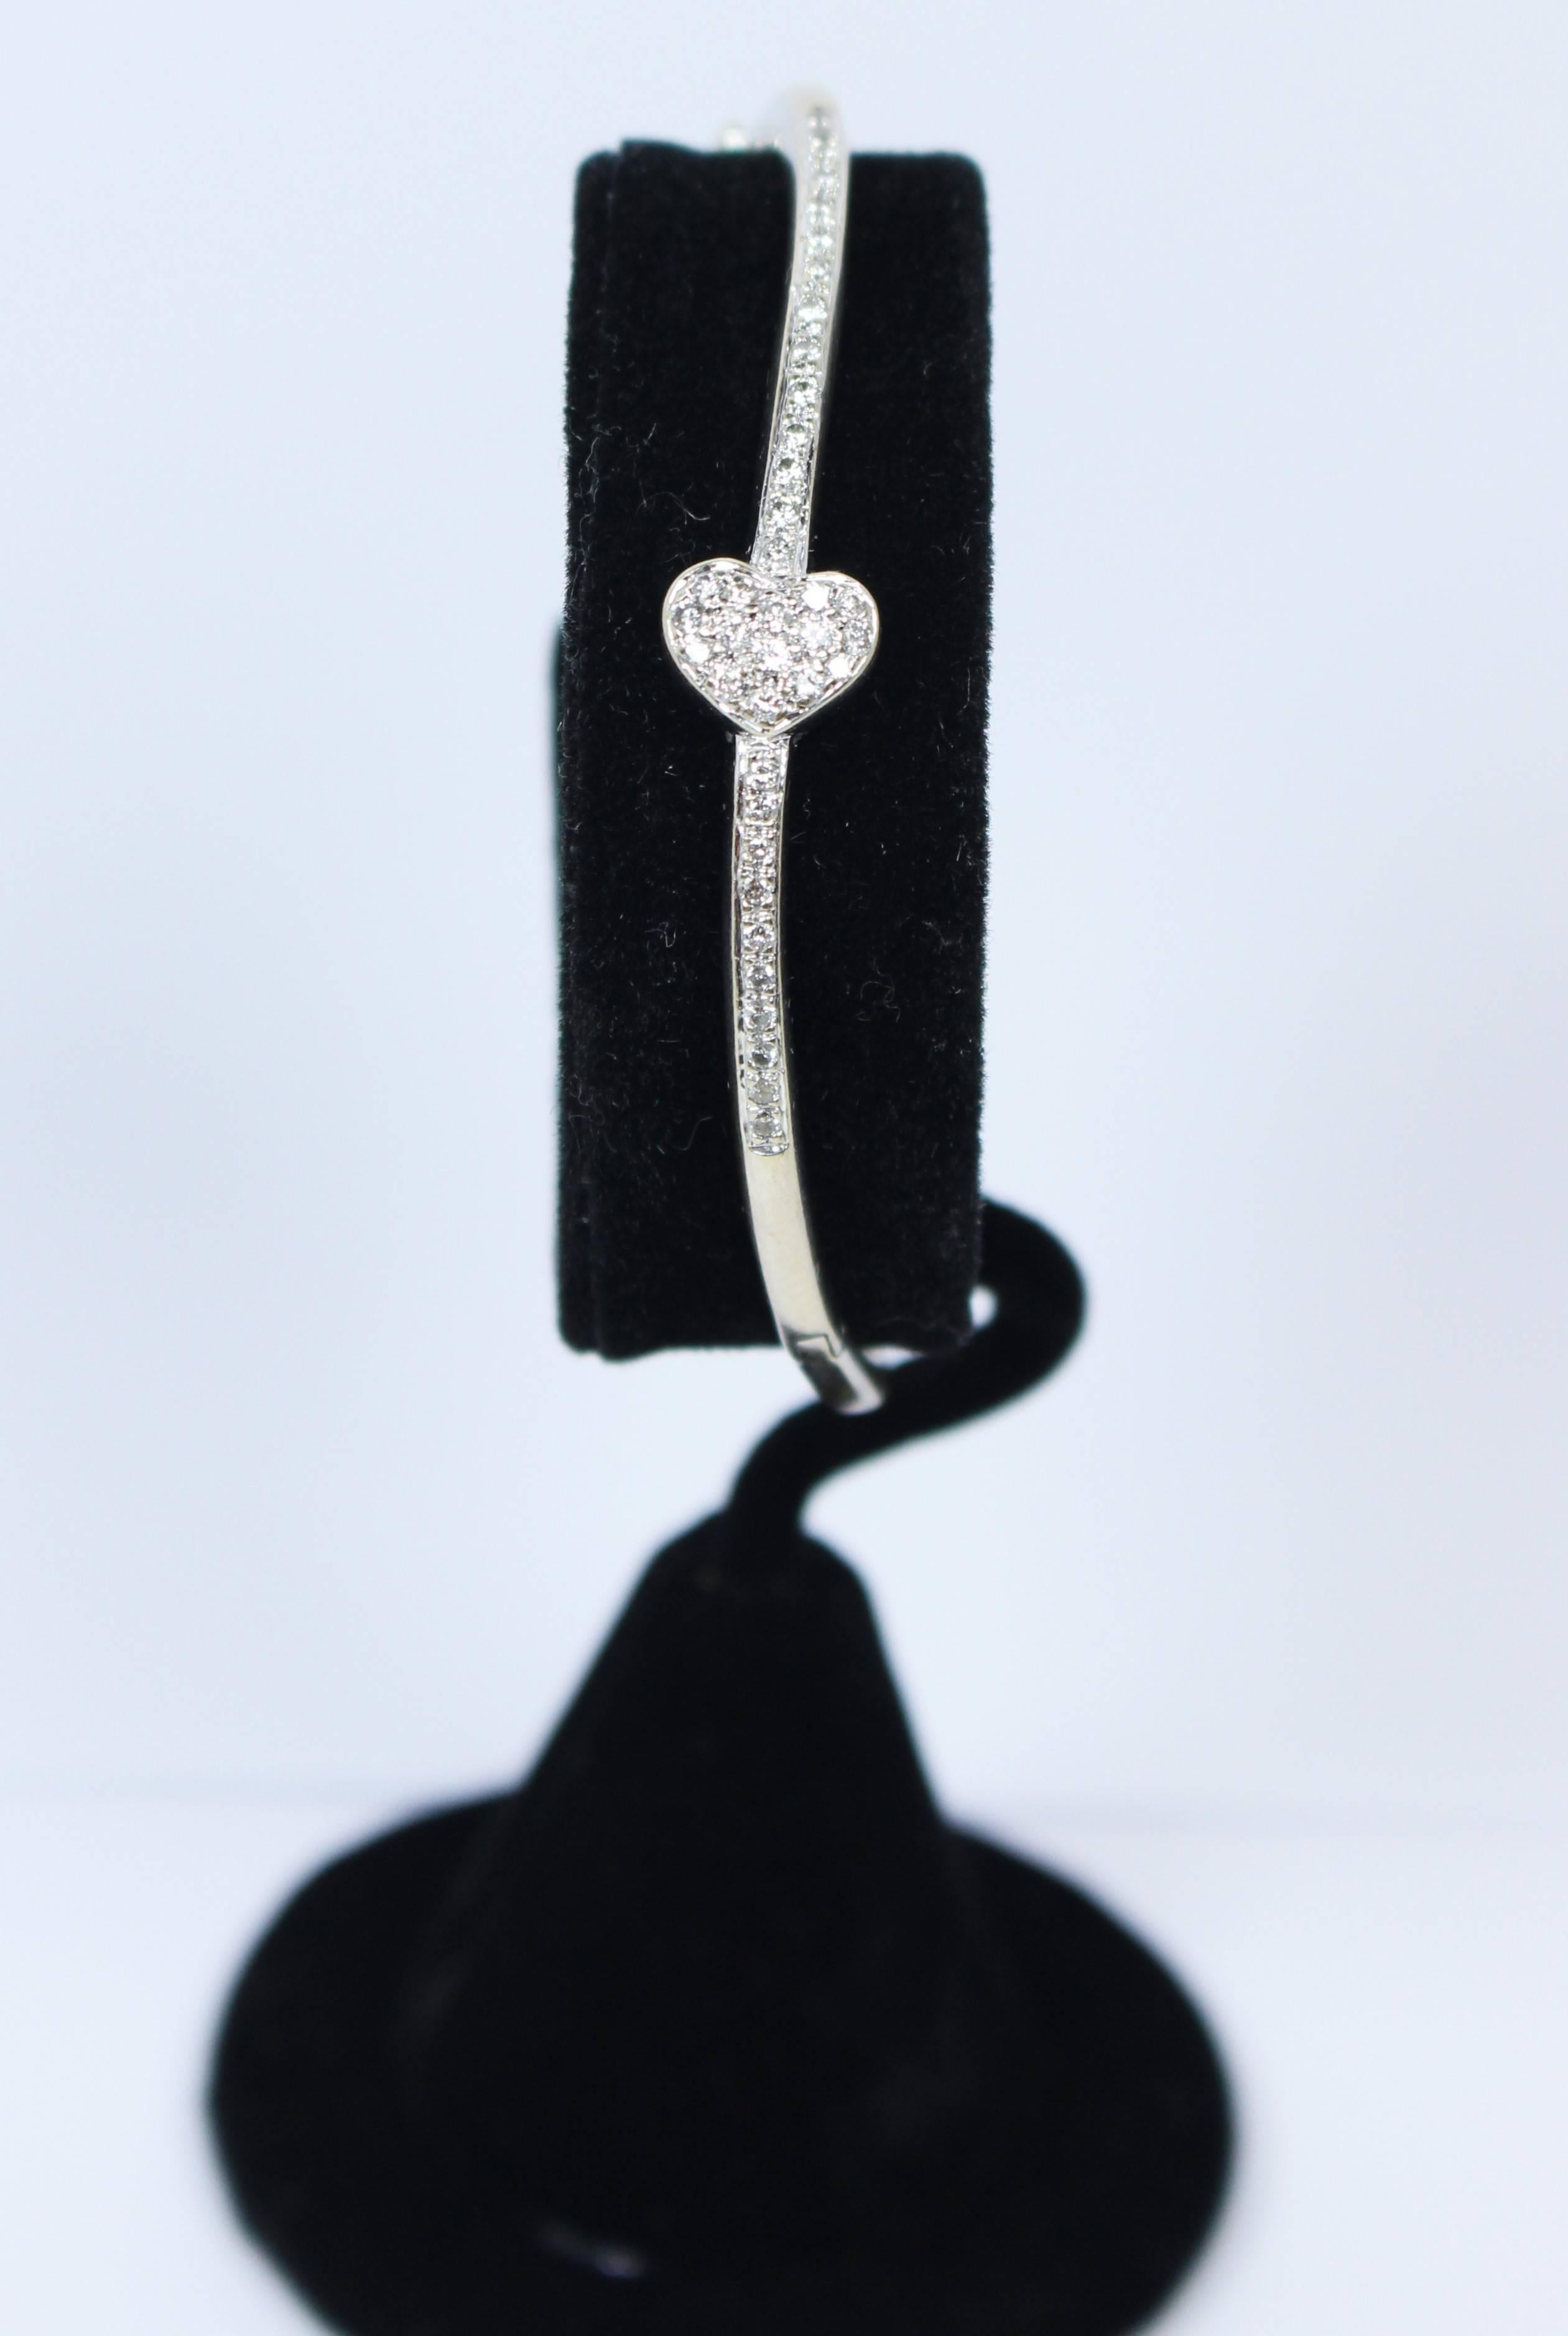 This bangle is composed of 18KT white gold with pave diamond details and a heart design. There is a hinge opening. In excellent vintage condition.

Specs: 
18KT White Gold
Approximately 0.50 Carats Diamonds
 
Length: 6 7/16